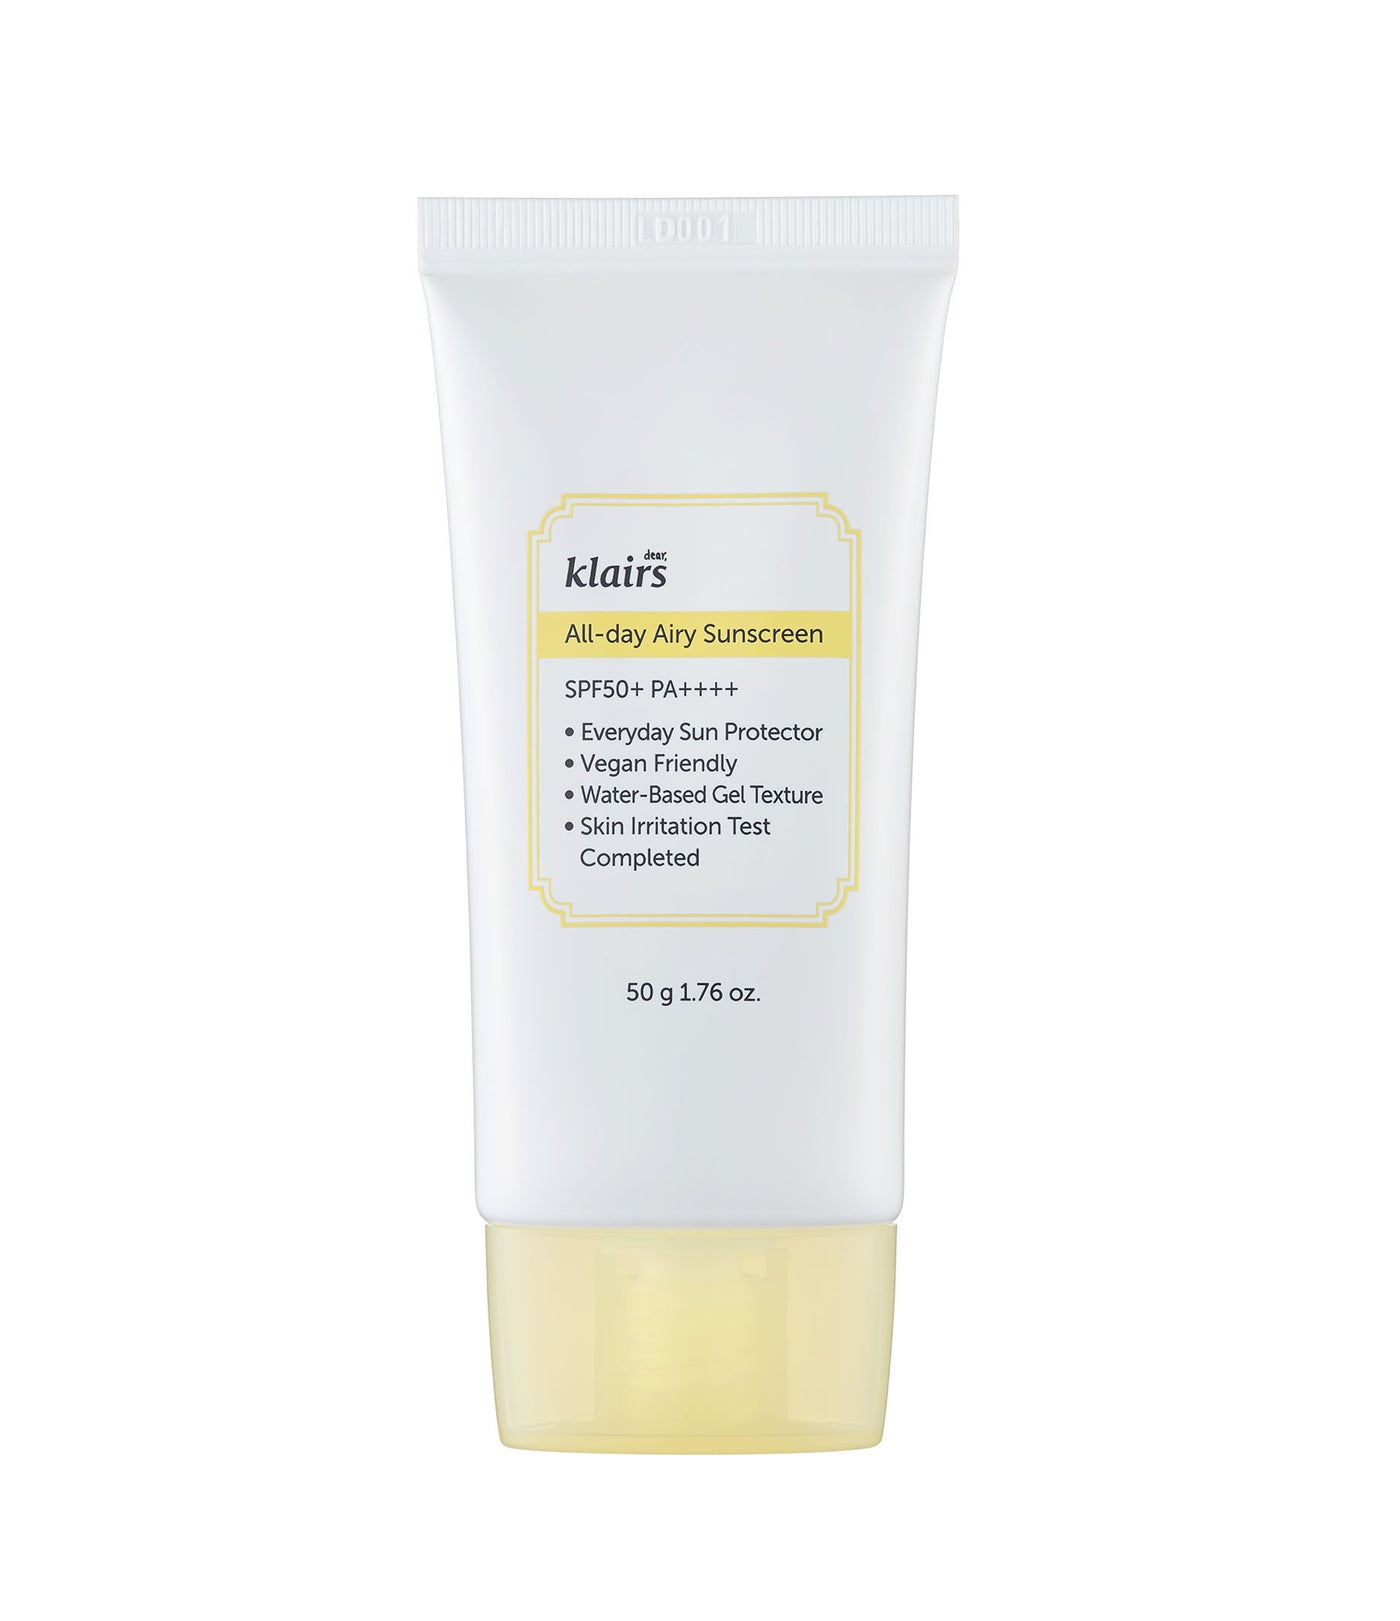 Klairs All-day Airy Sunscreen SPF50+ PA++++